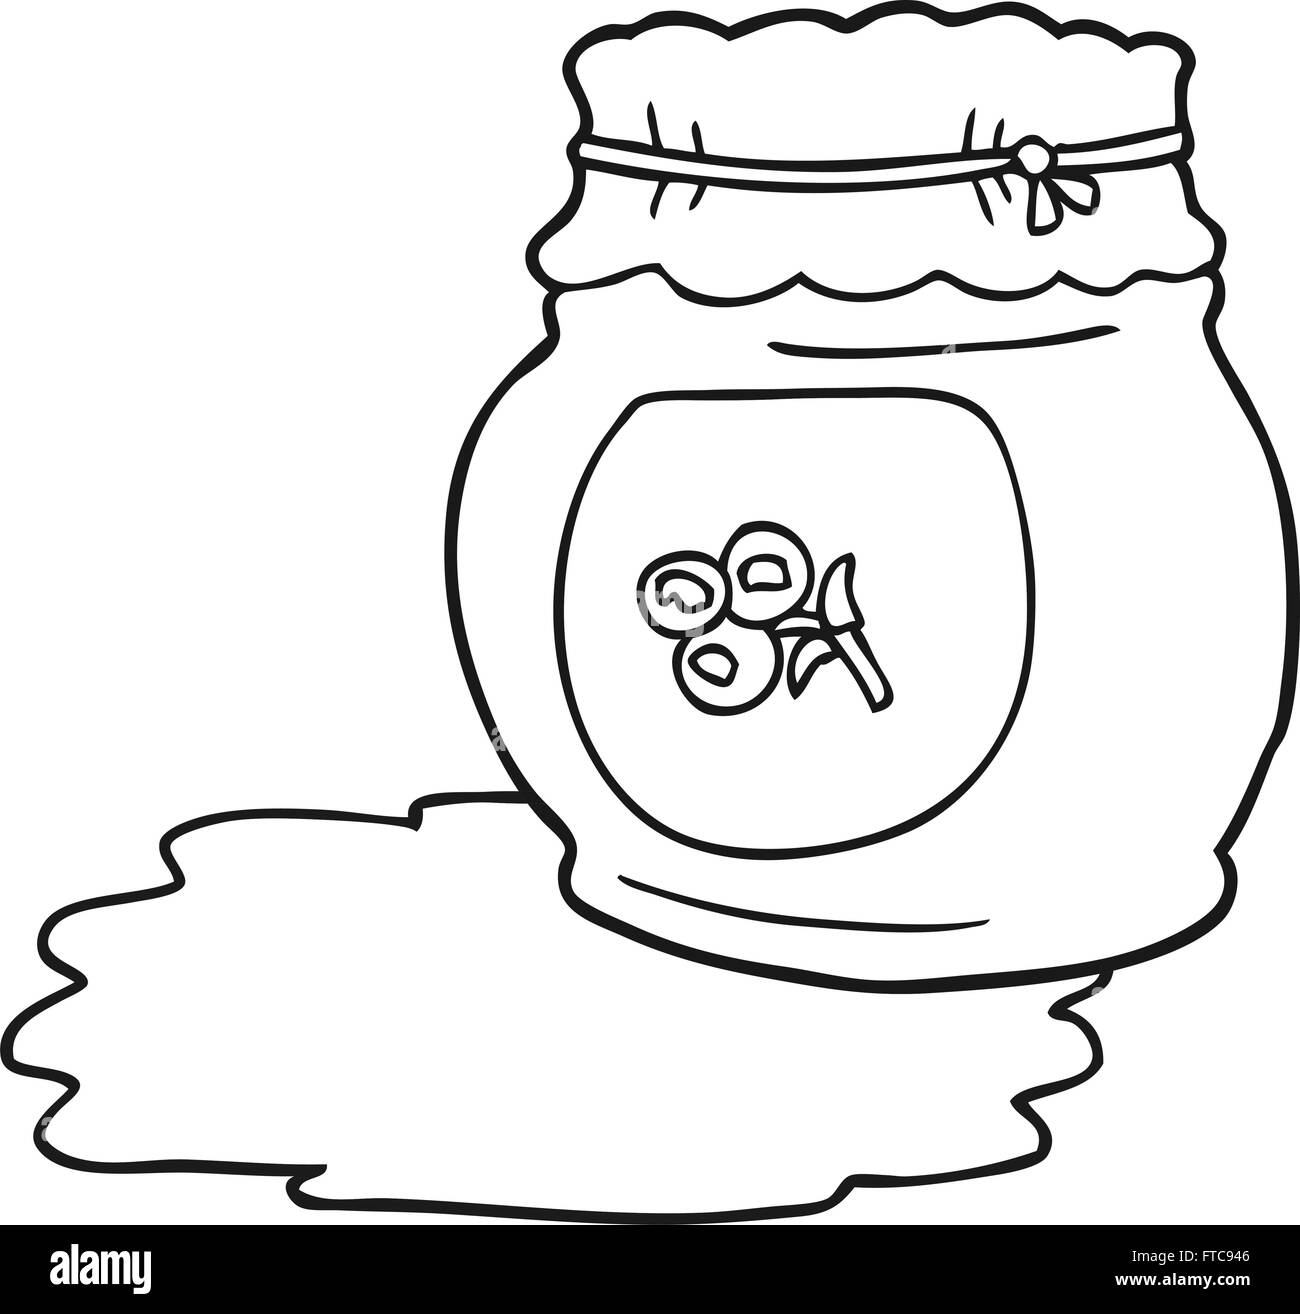 freehand drawn black and white cartoon blueberry jam Stock Vector